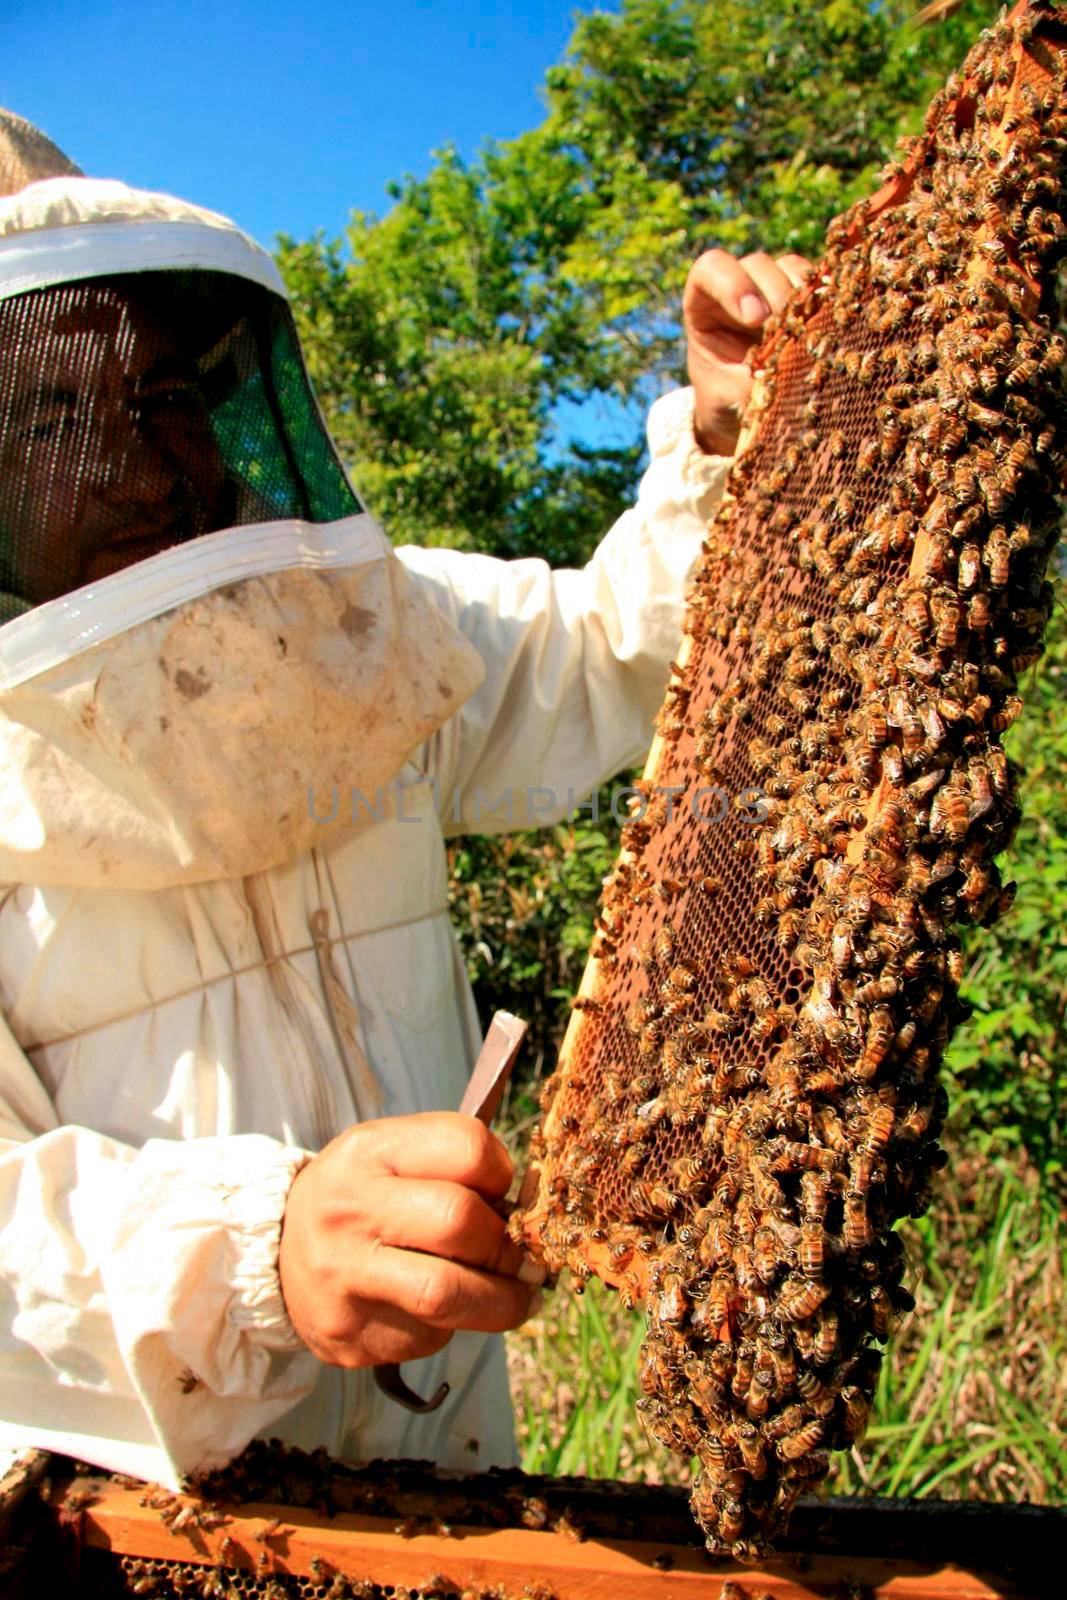 eunapolis, bahia / brazil - may 11, 2009: Beekeeper is seen next to the bee hive in the city of Eunapolis.